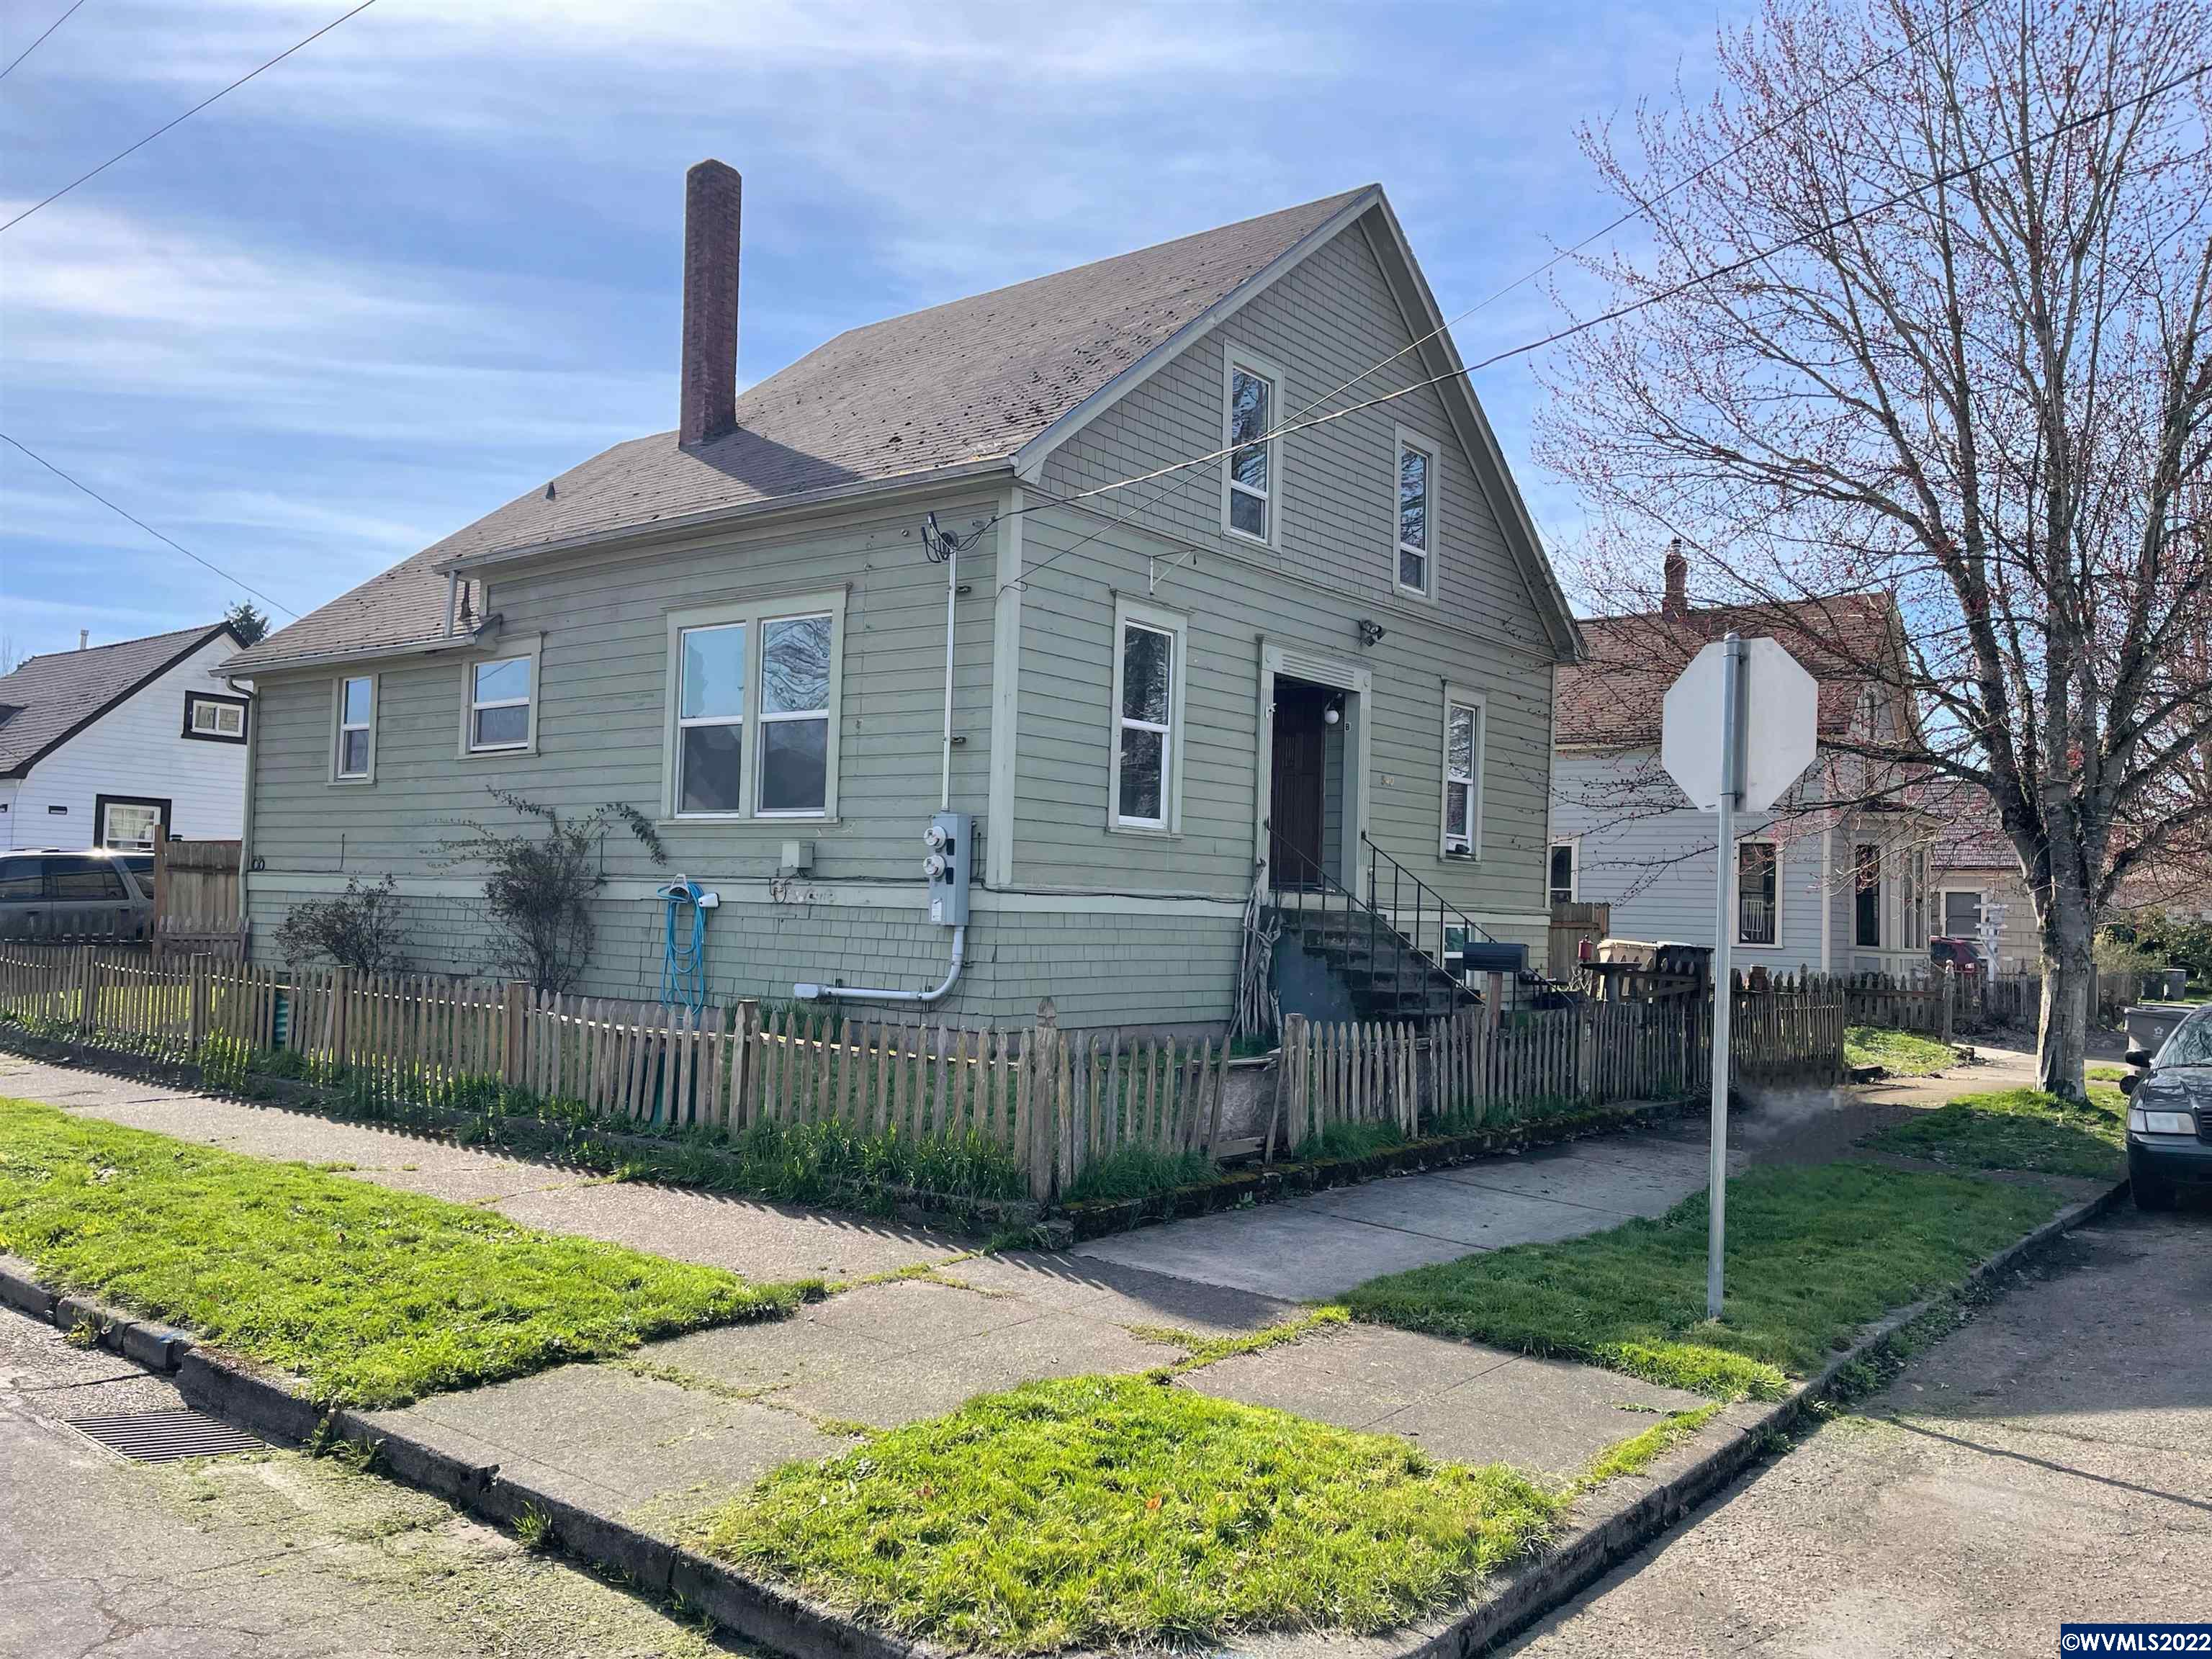 Investor Special! 1920s historical home located on a corner lot close to downtown. Updated plumbing, electrical boxes and vinyl windows. Single Family Home currently set up as a duplex. Current long-term renters both would like to stay. Property sold as is, will need to be a cash purchase.